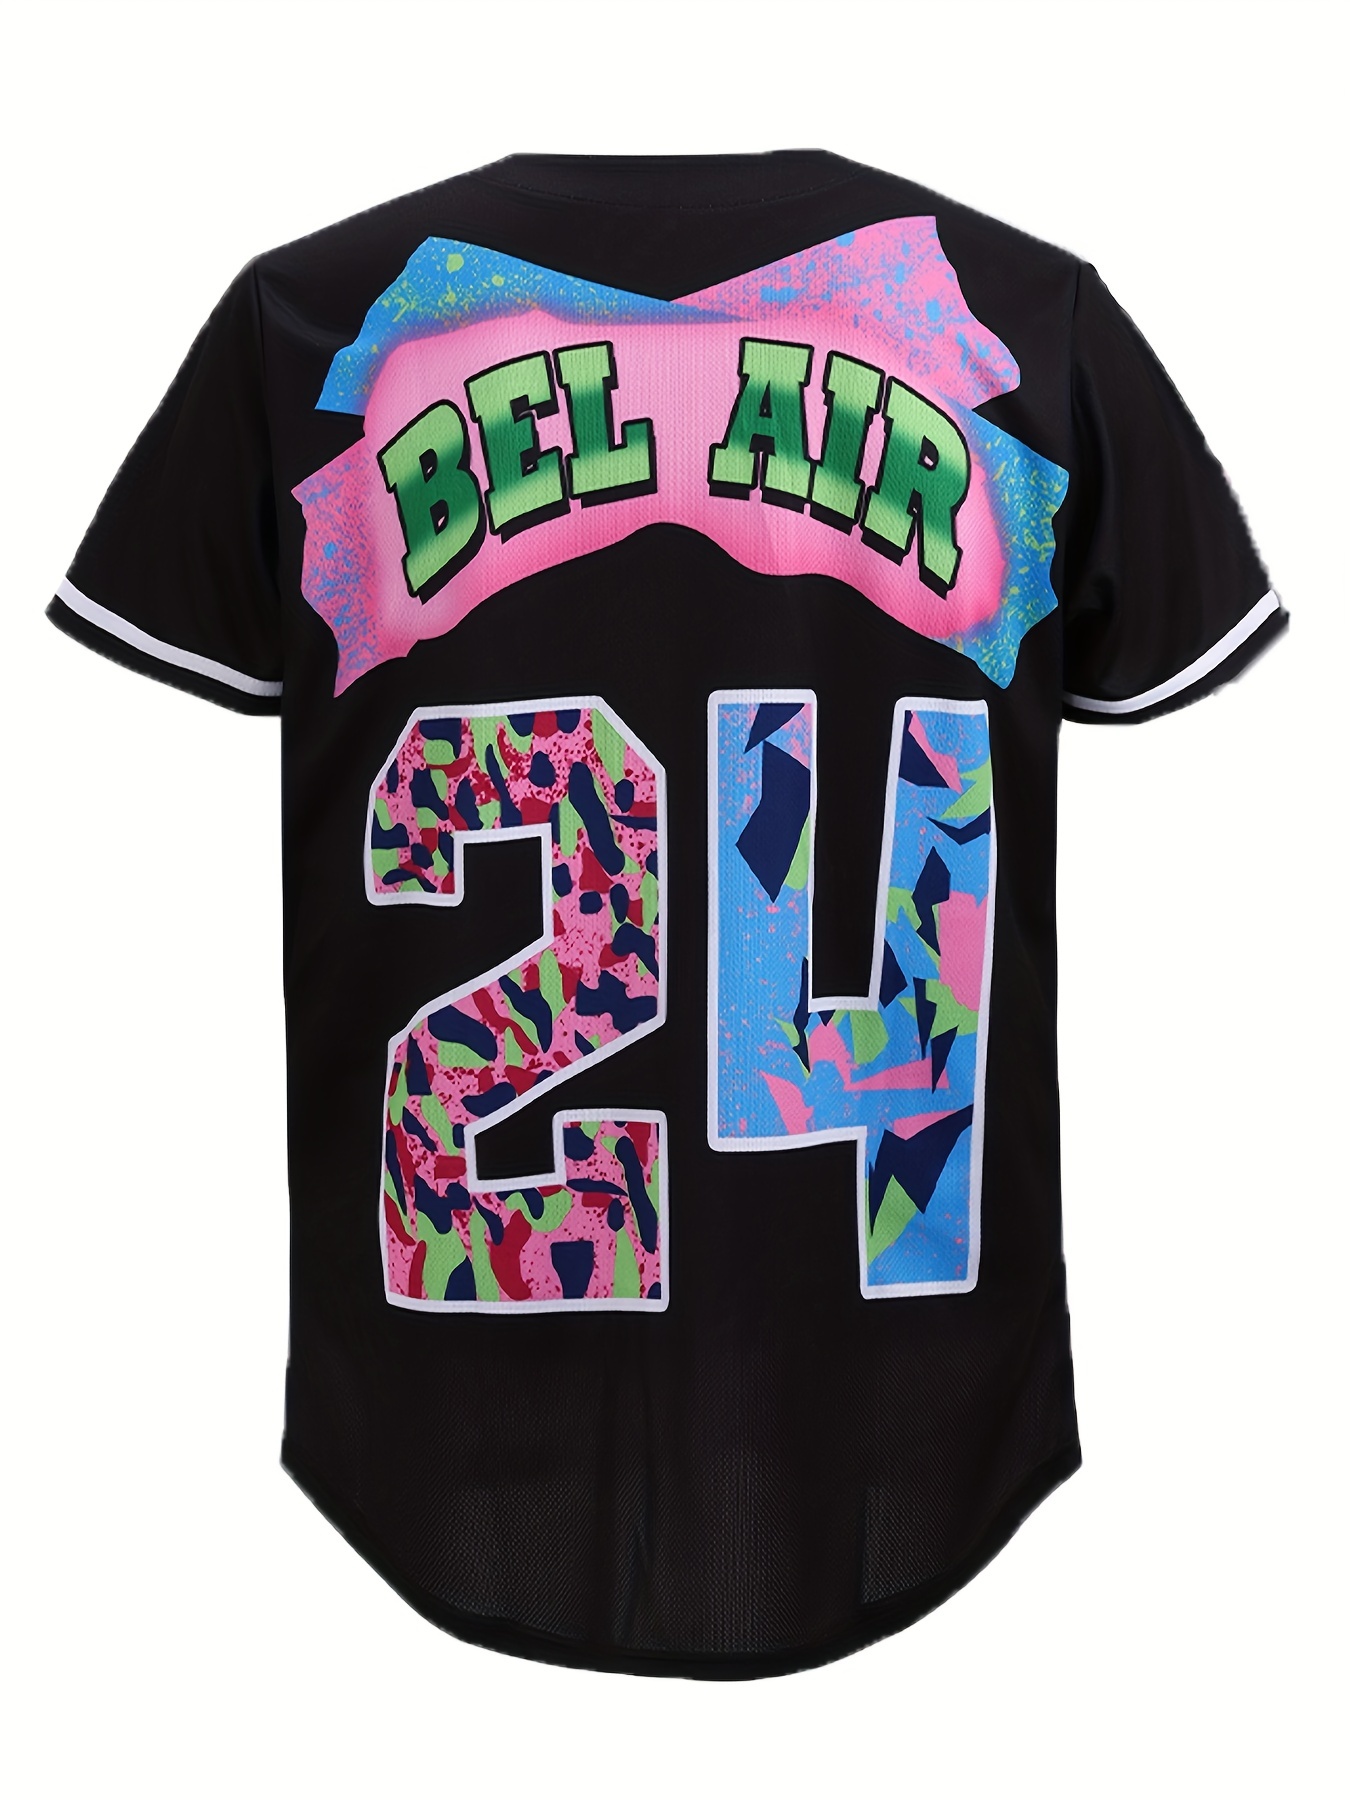 Men's Bel Air #24 Baseball Jersey, 90's City Theme Party Clothing